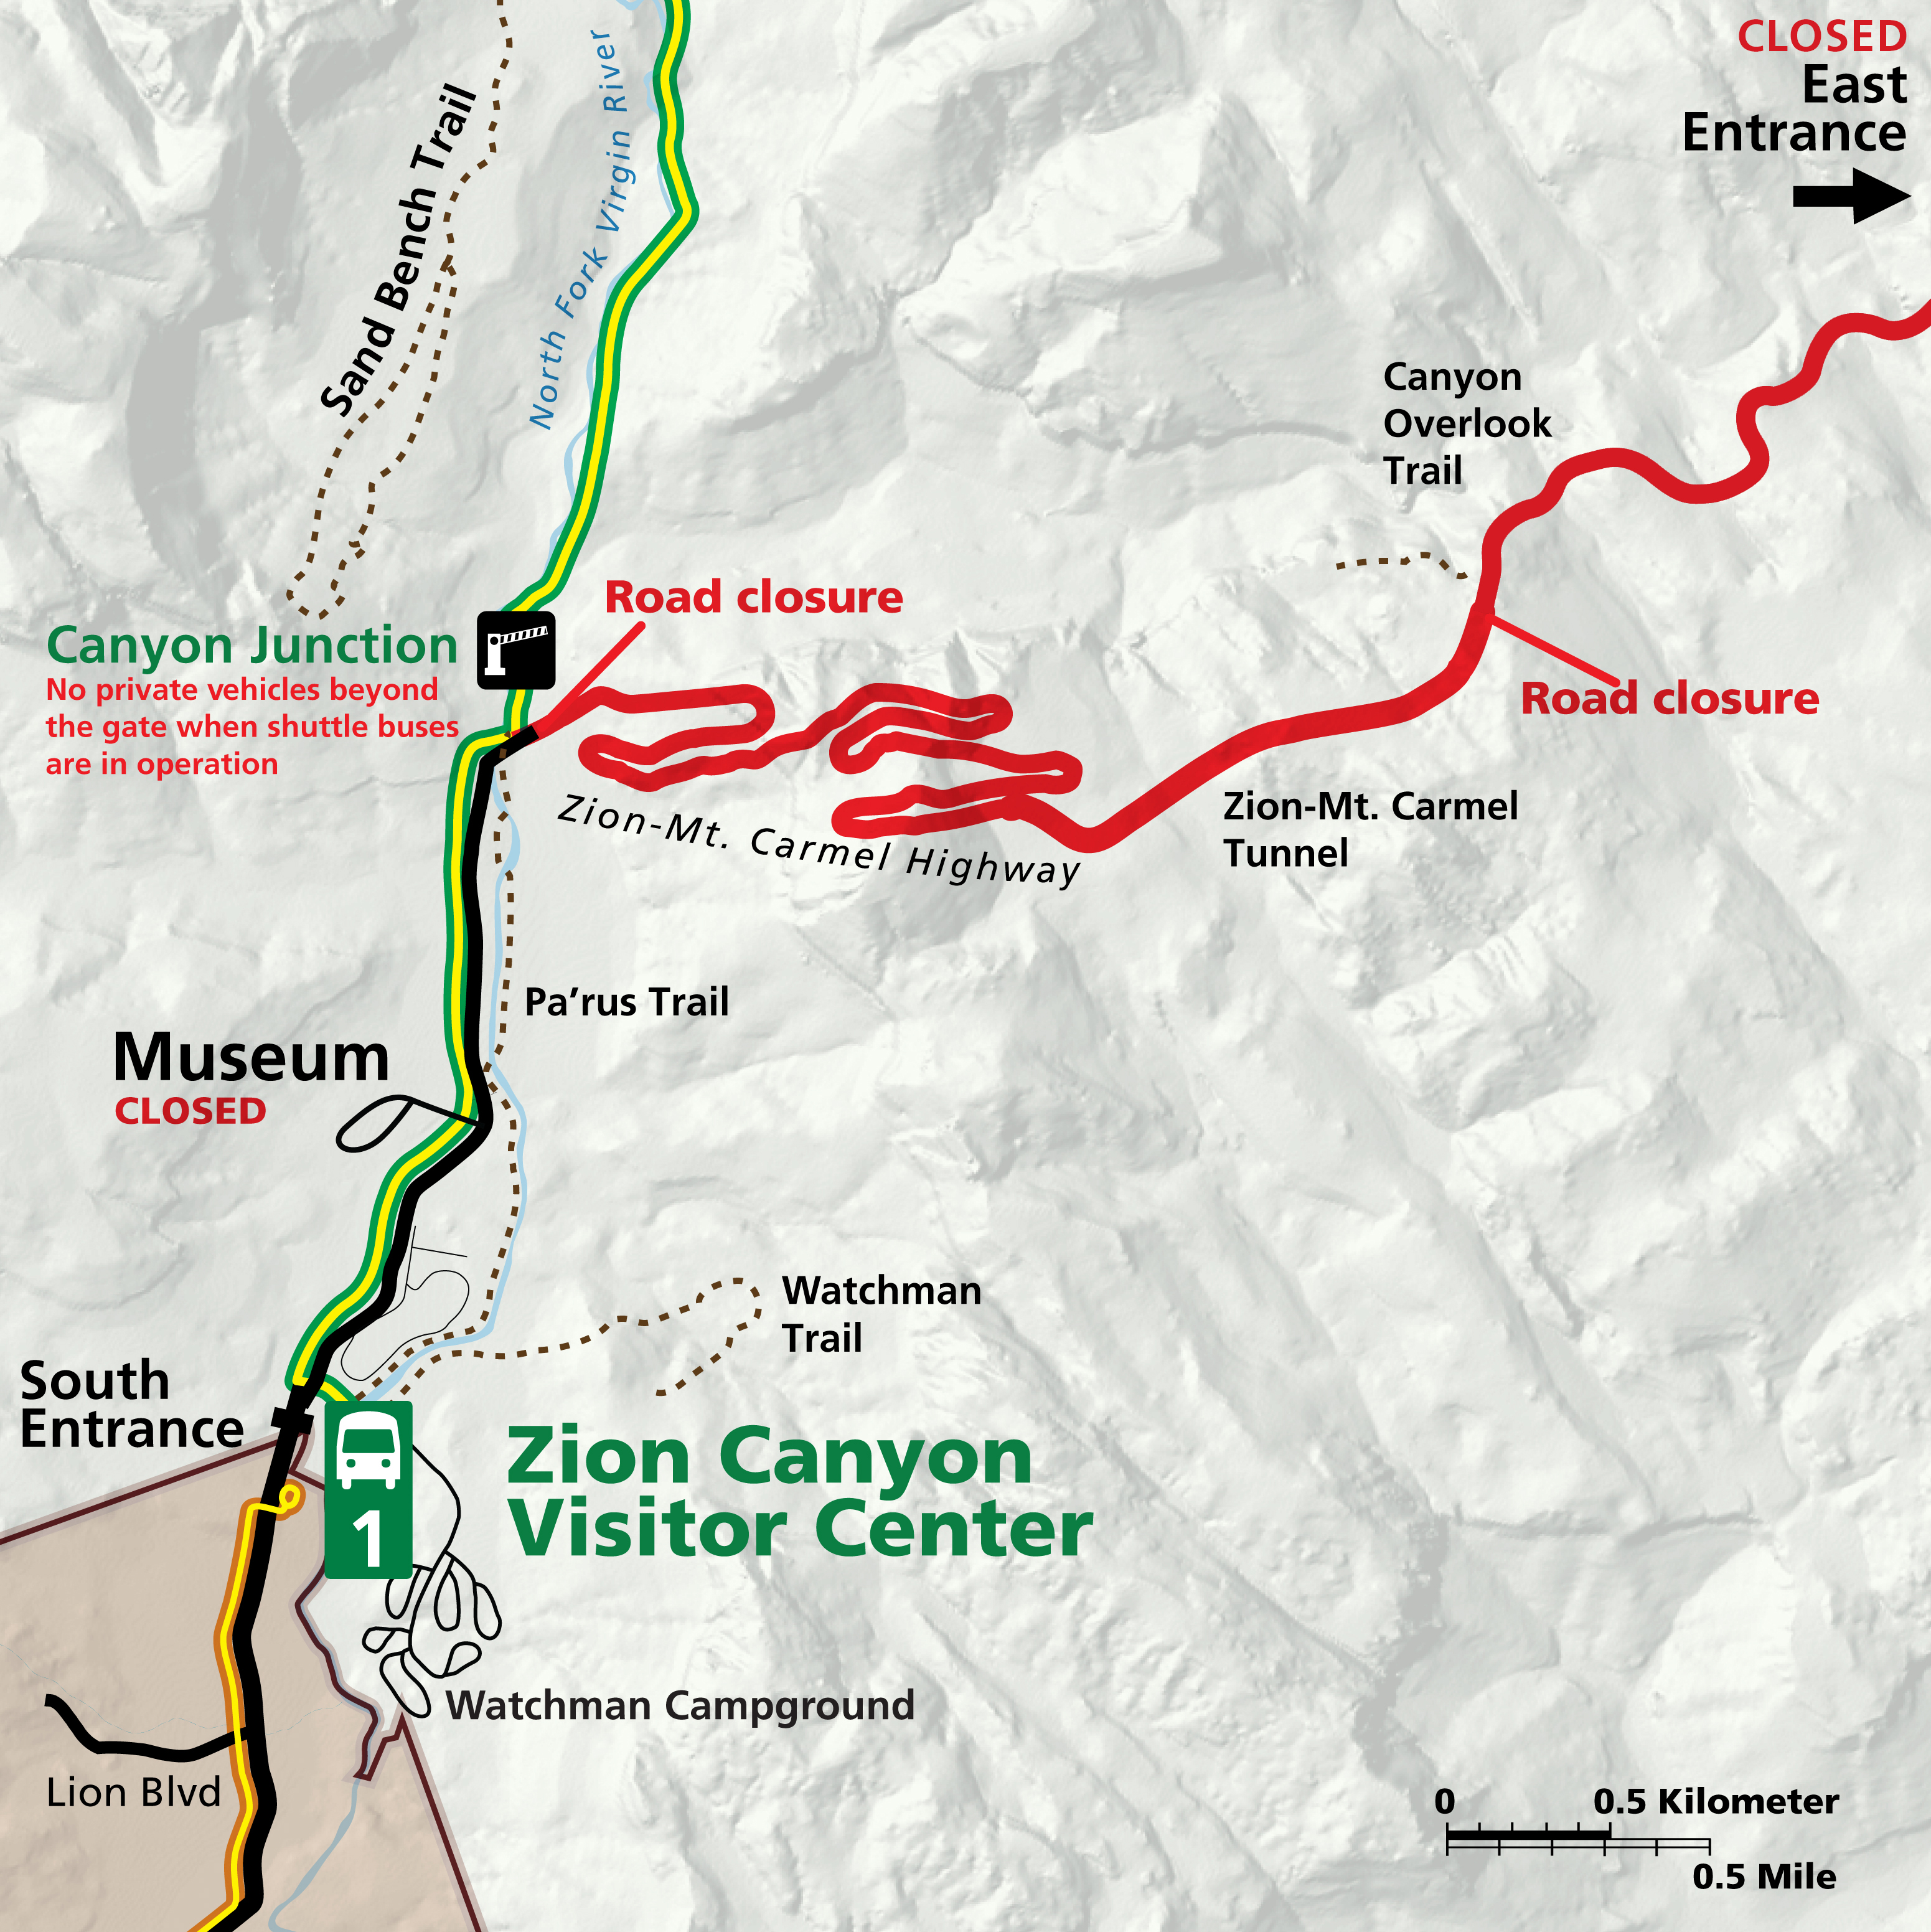 Map of Zion National Park highlighting access changes during night construction.